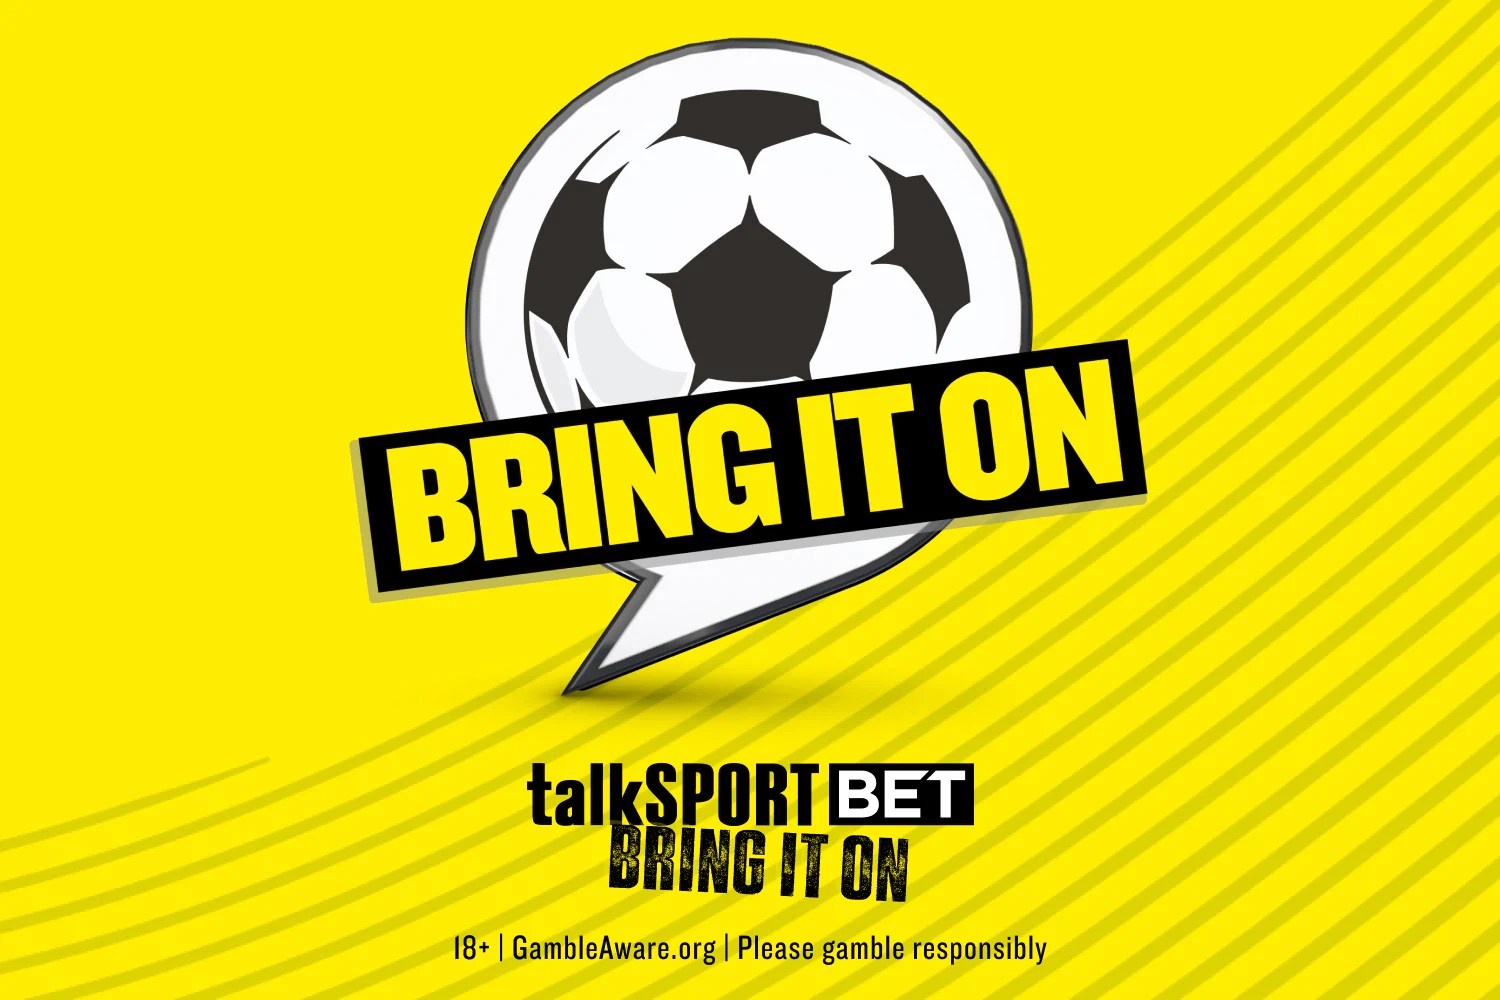 talkSPORT betting tips - Best football bets and expert advice for Friday 10 May